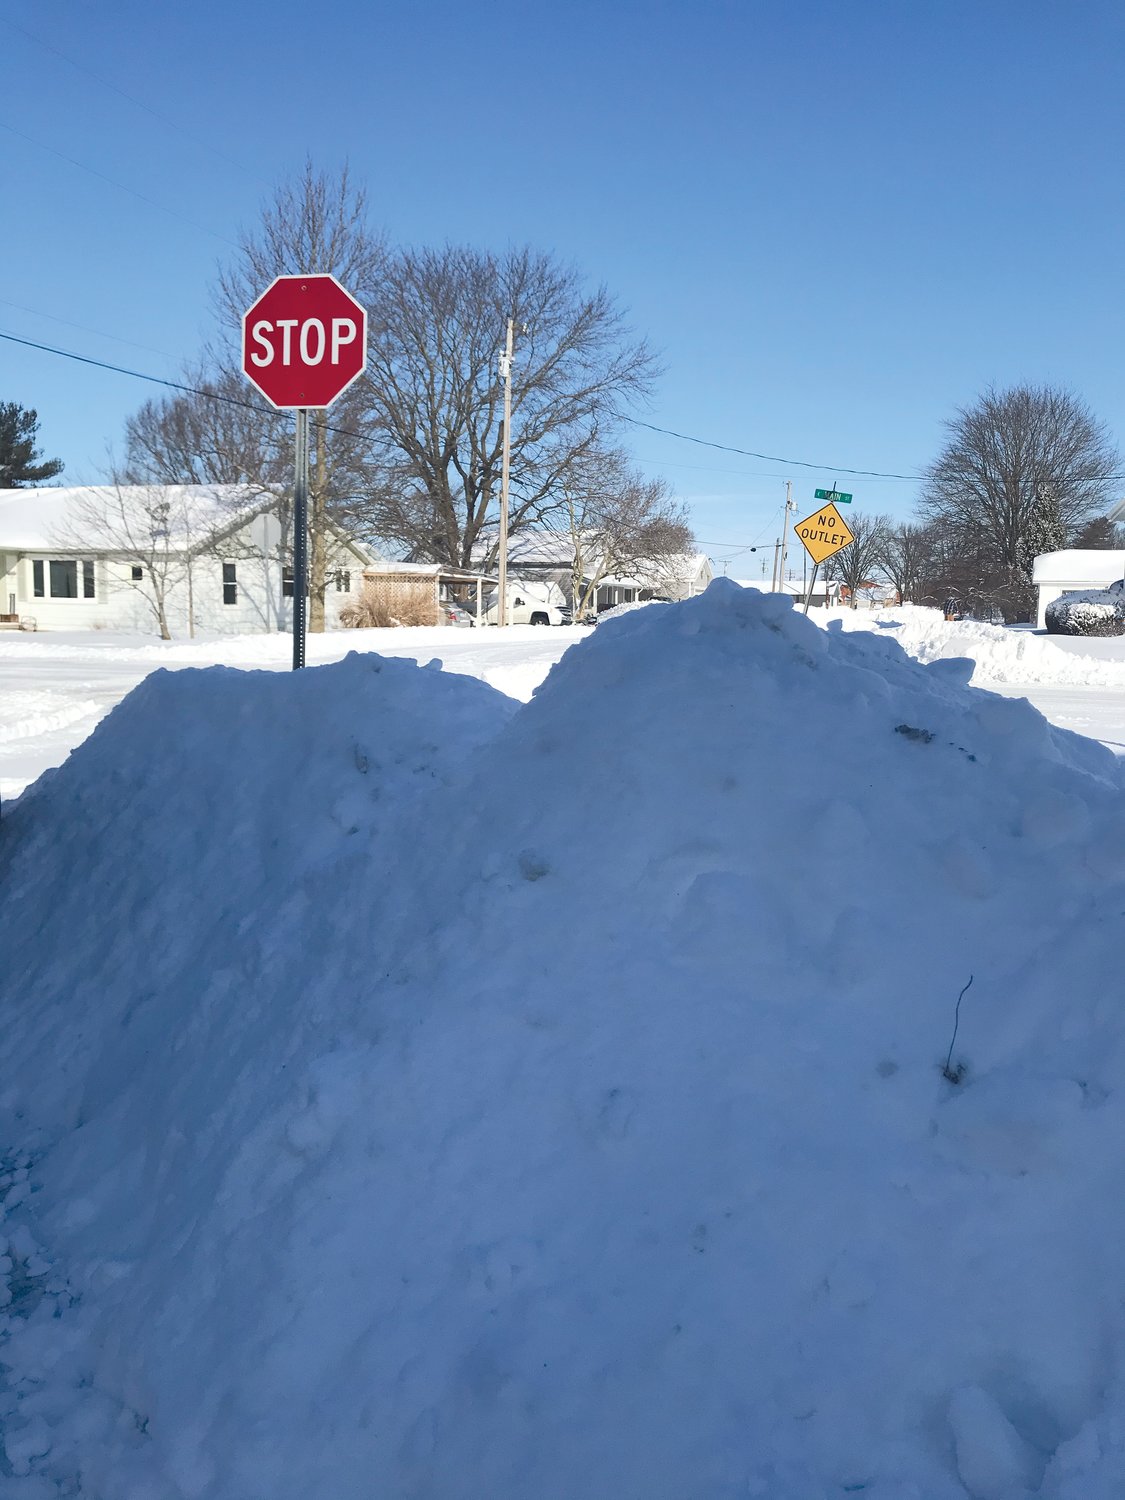 Snow piled up at an intersection in New Market on Tuesday.